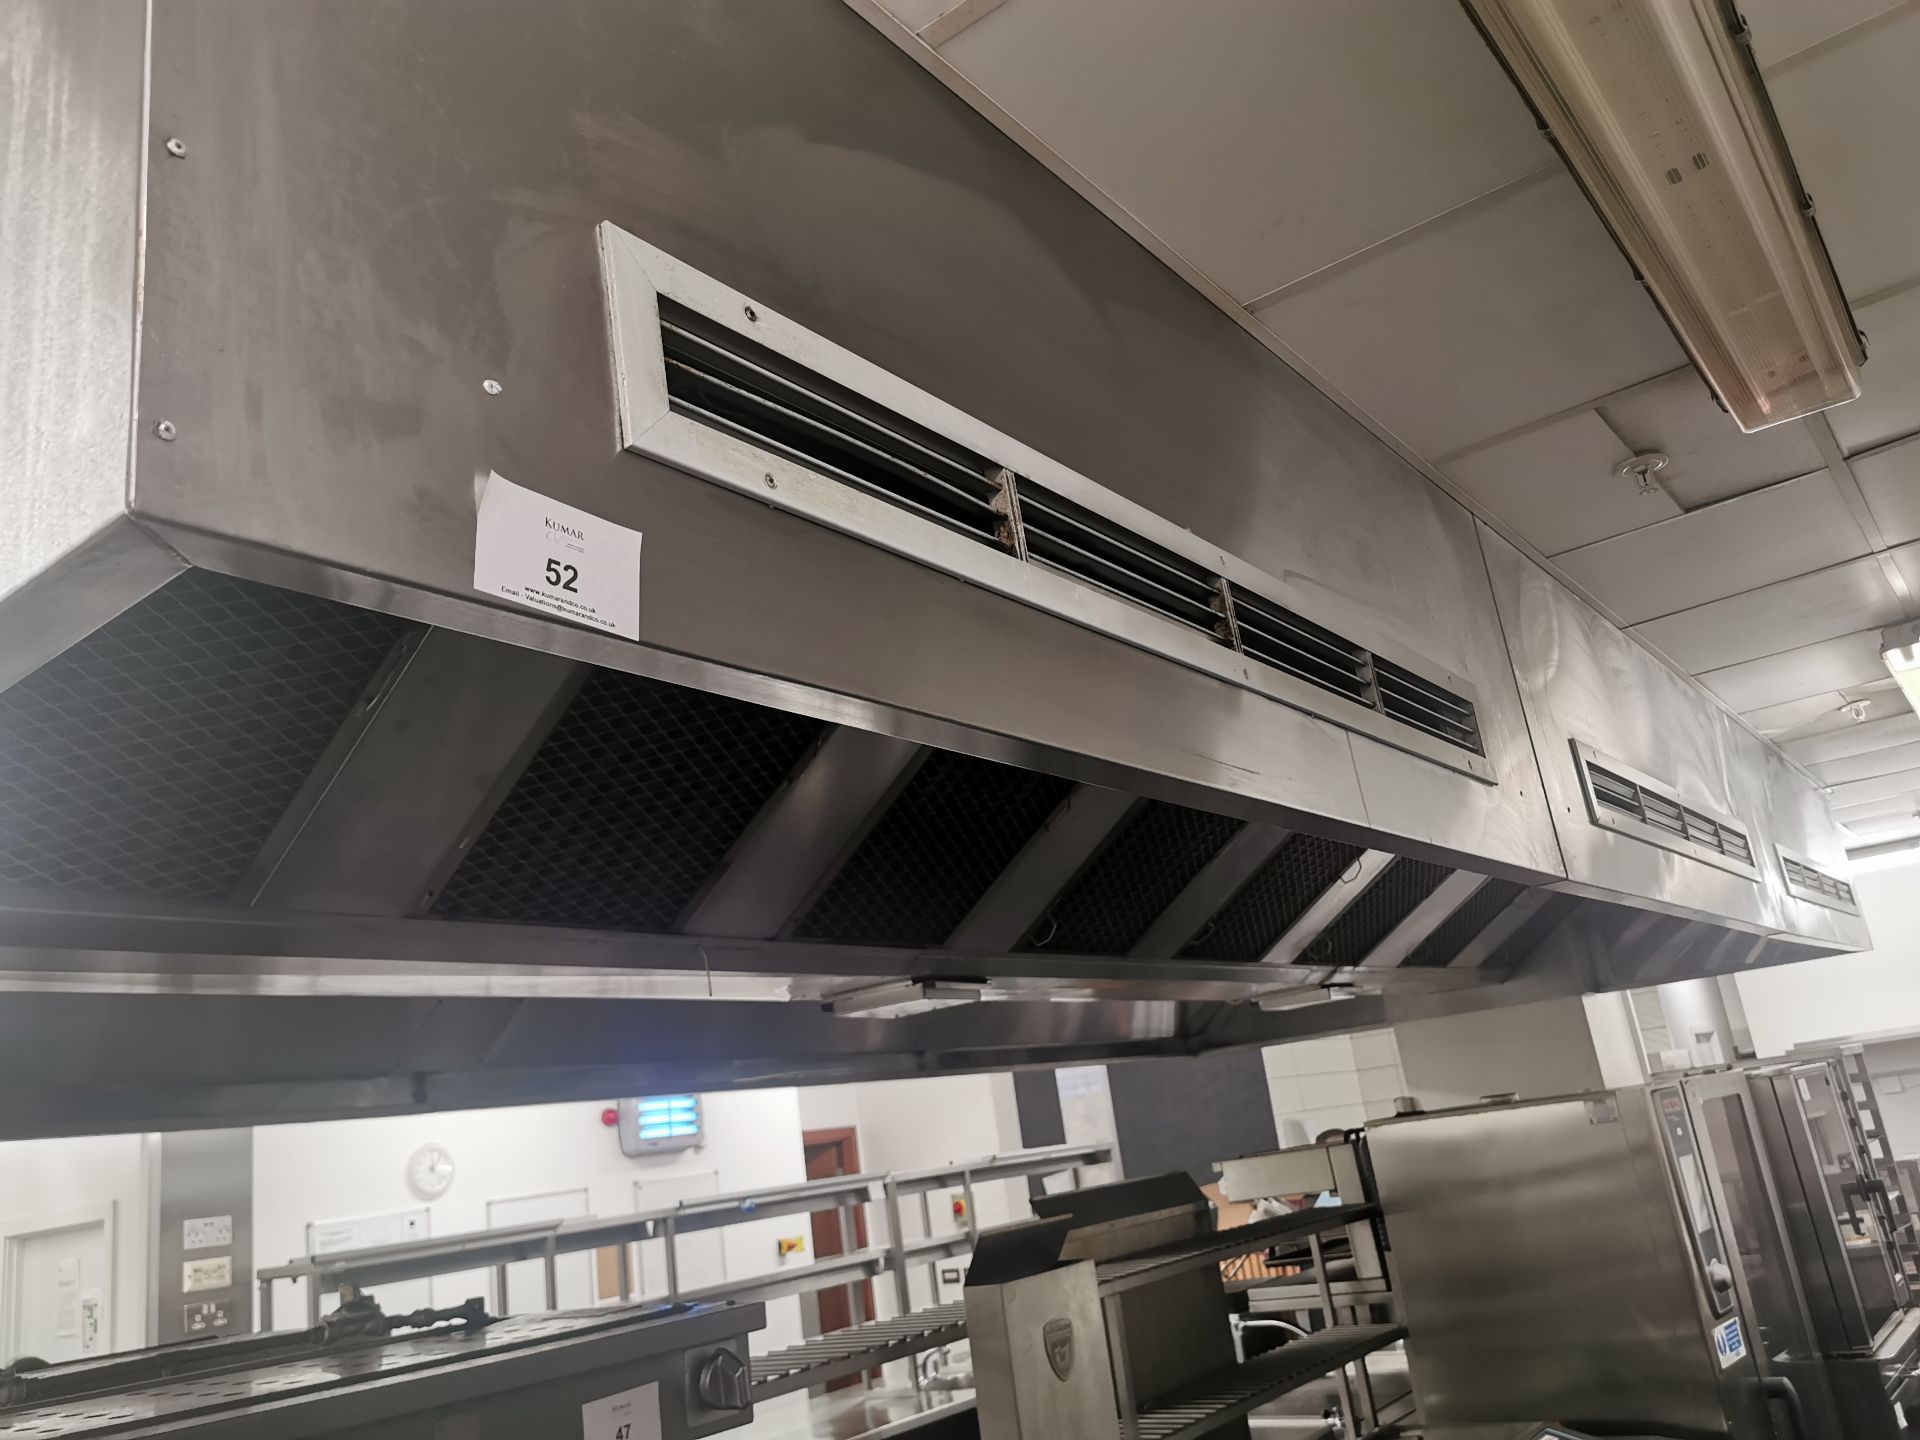 Commercial stainless steel extractor canopy hood, - Image 3 of 5